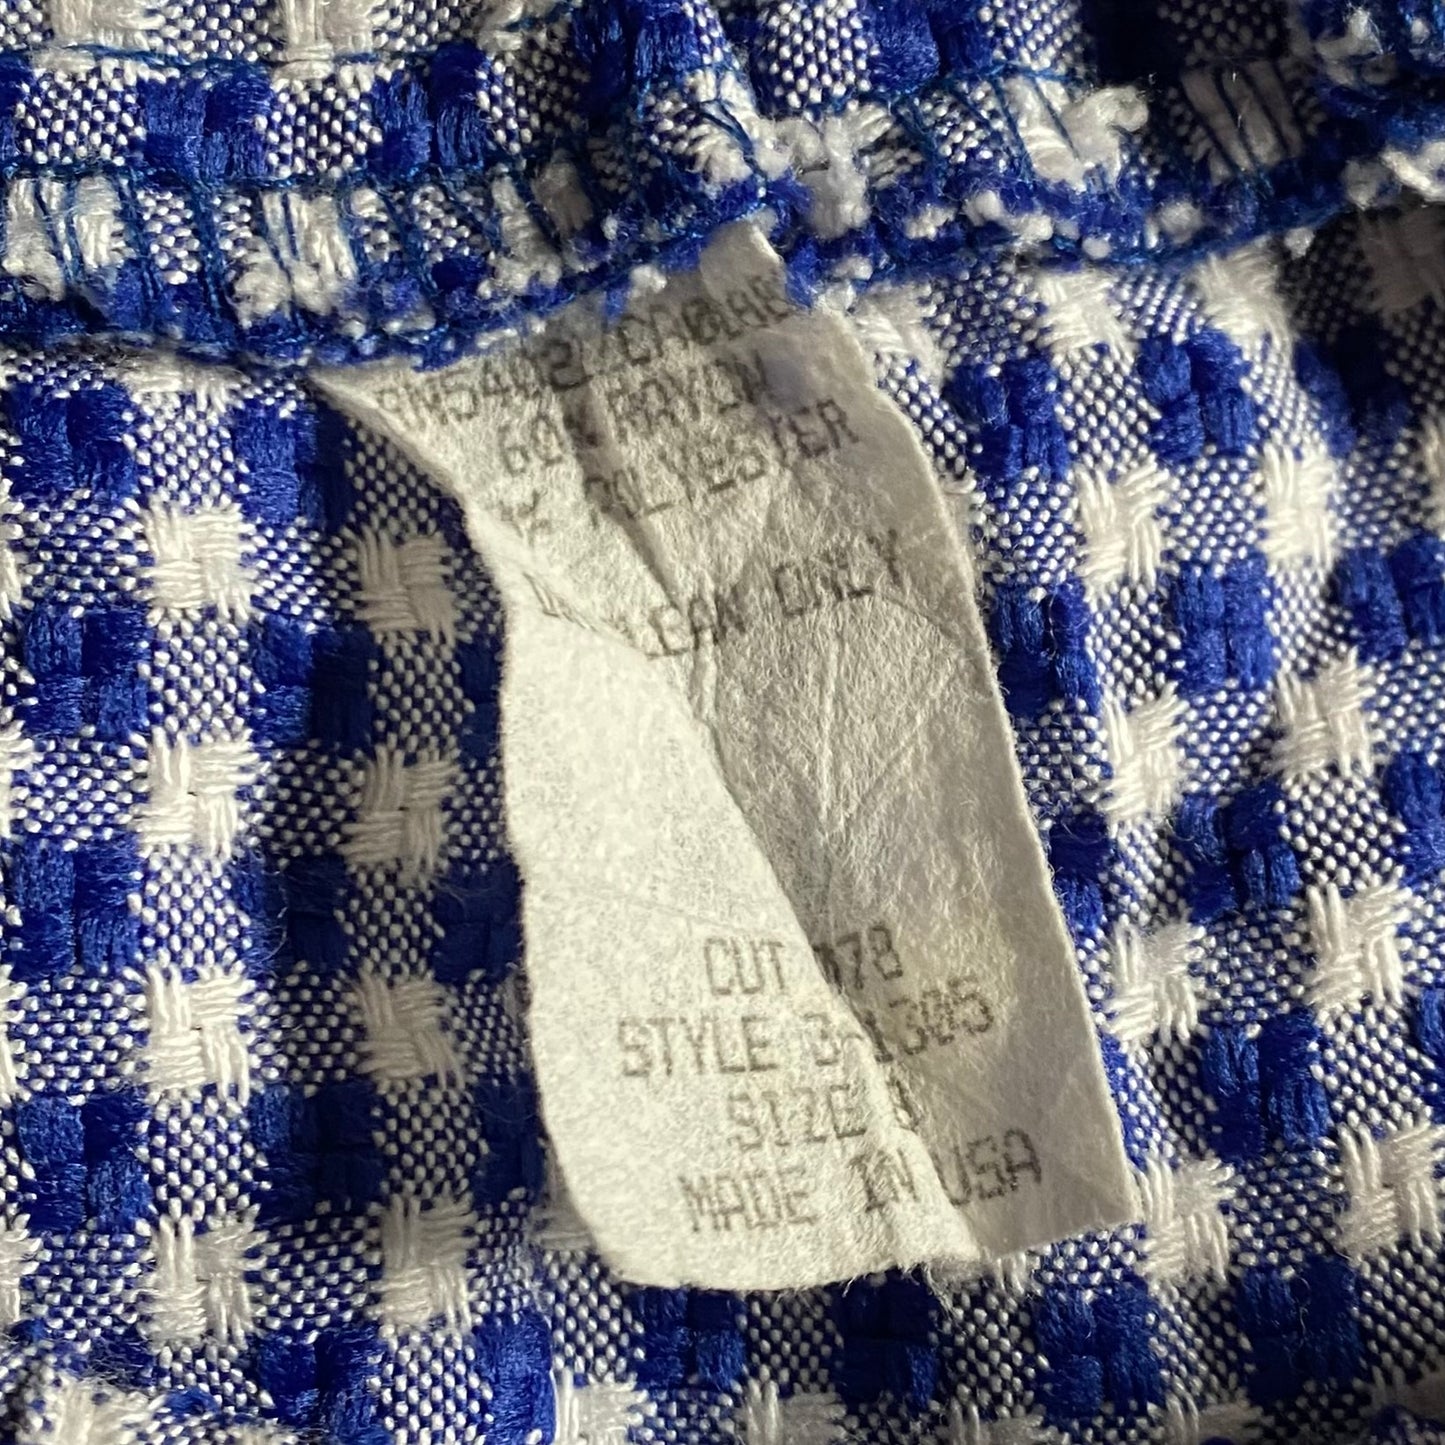 Fashionable blue and white gingham skirt - label view. Made in USA